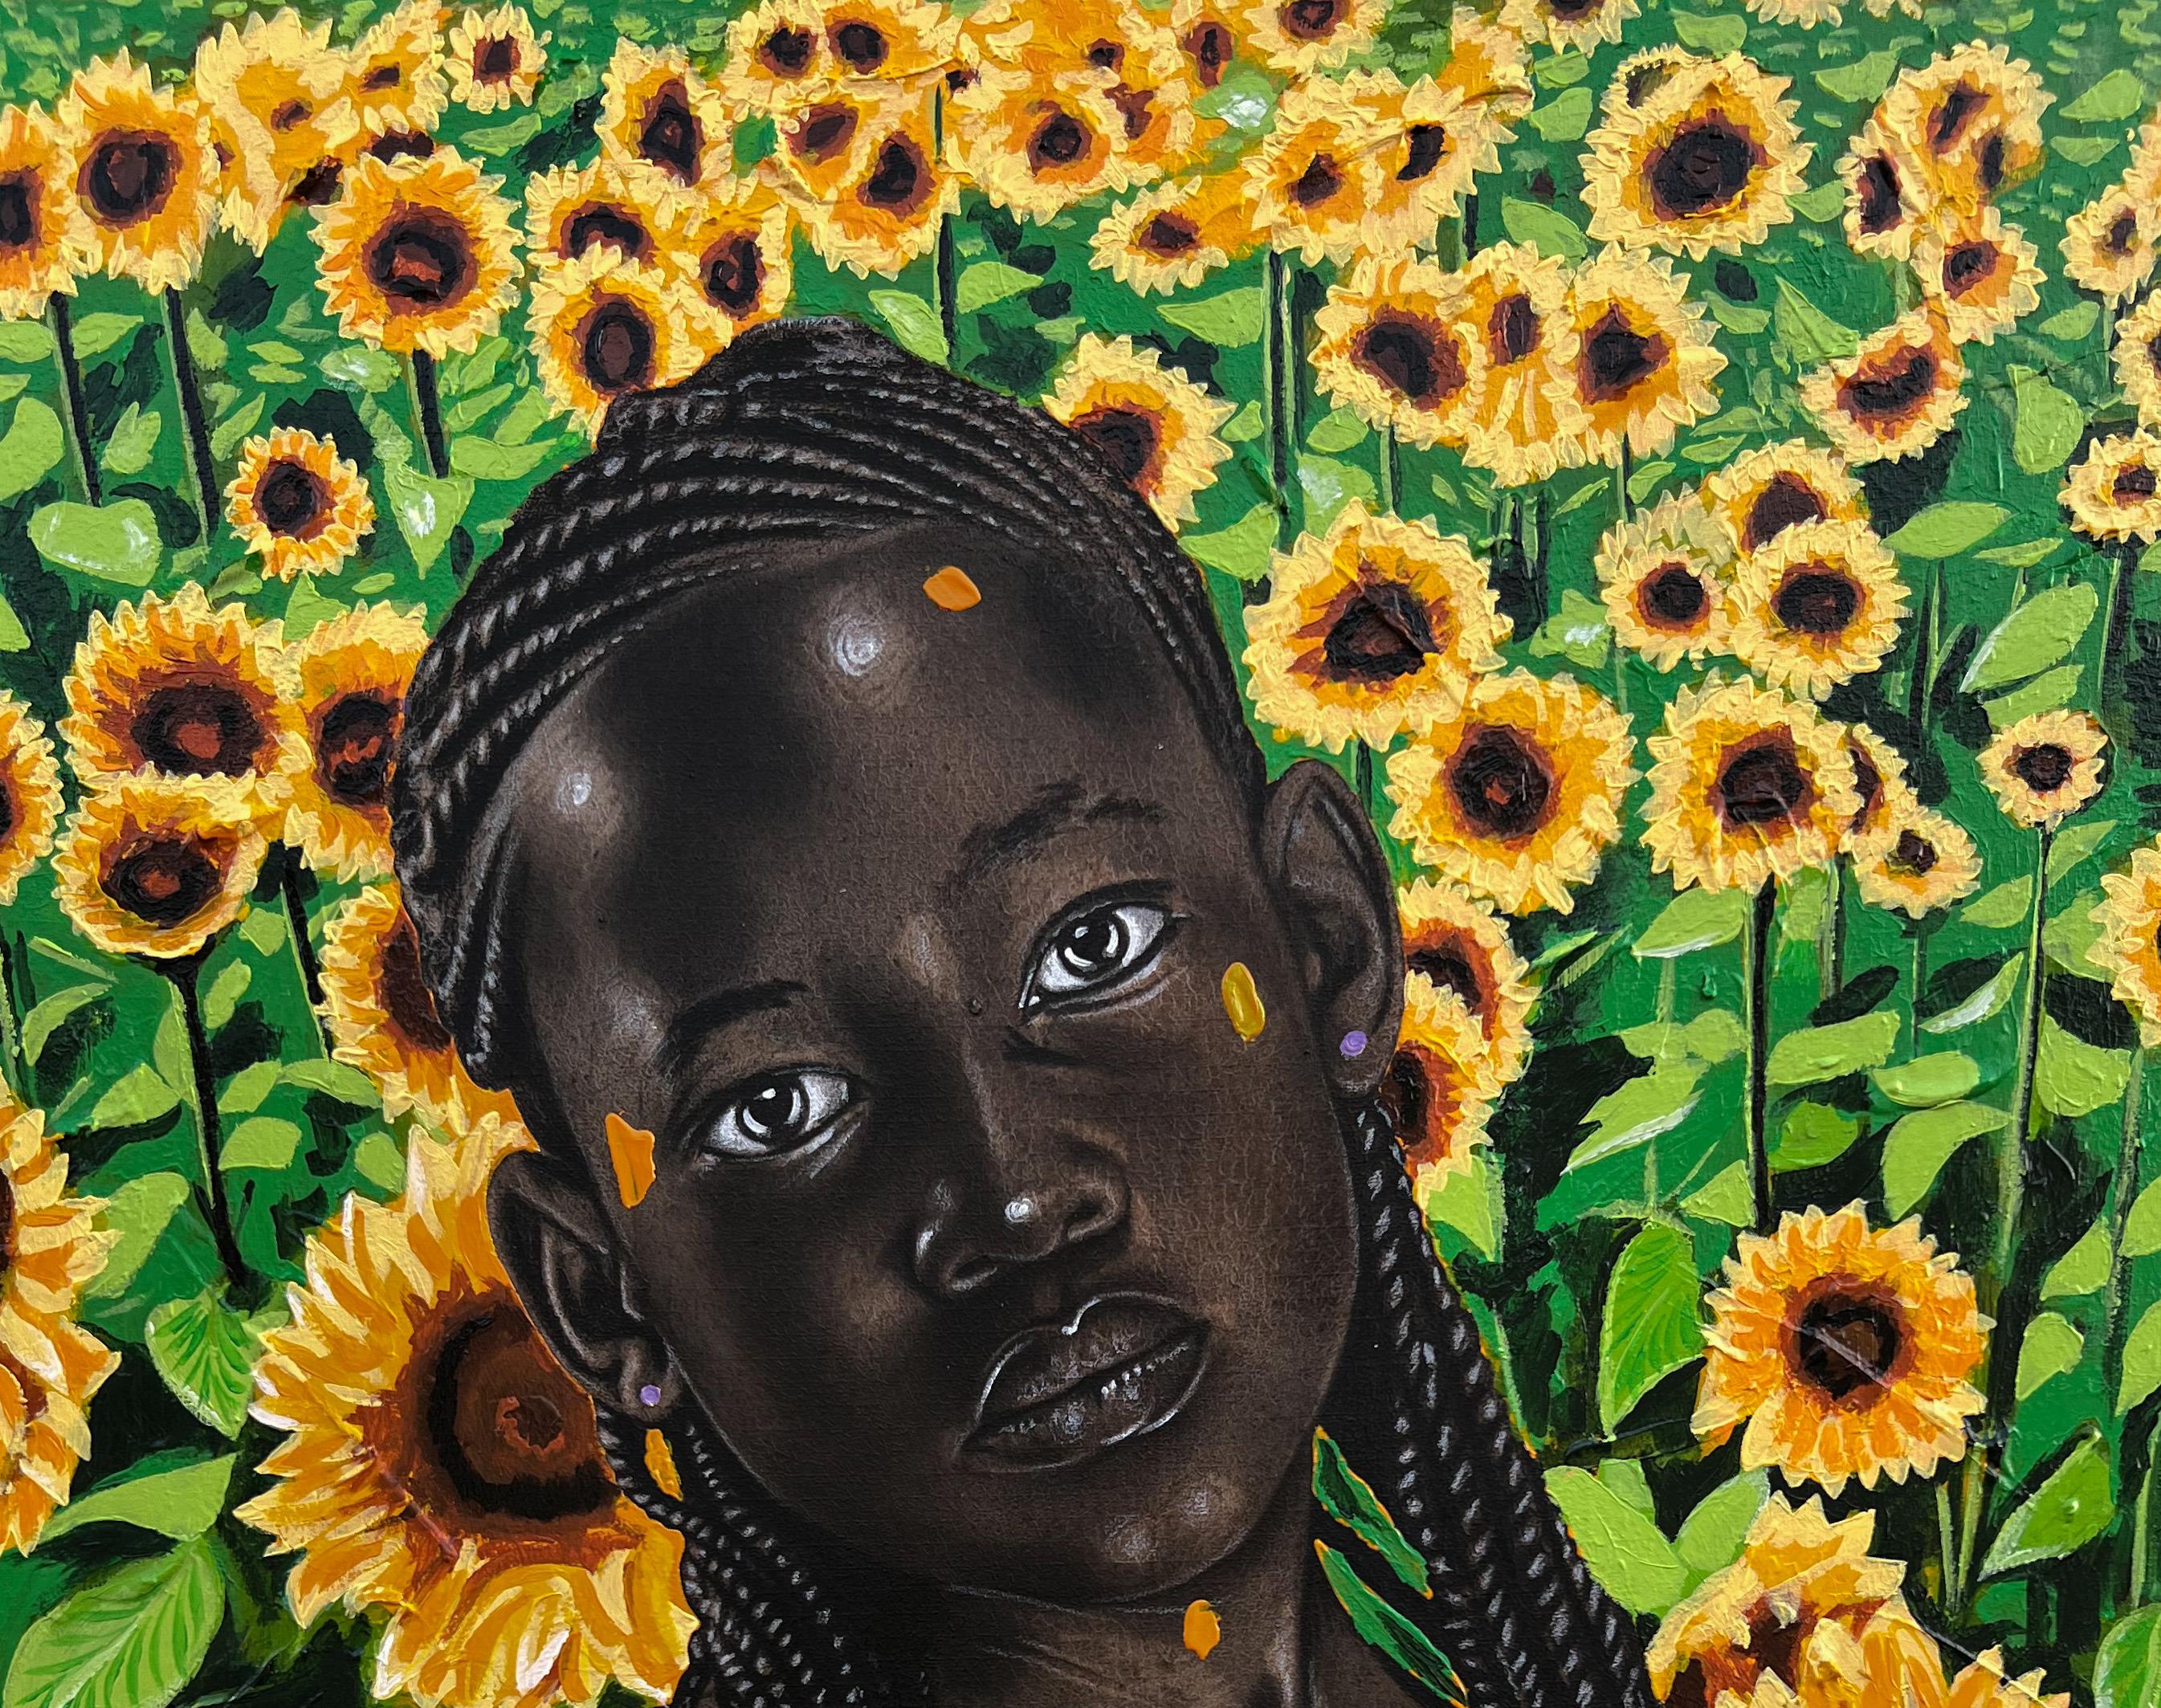 Sunflower Teaches Us So Much About Love - Expressionist Mixed Media Art by Eyitayo Alagbe 